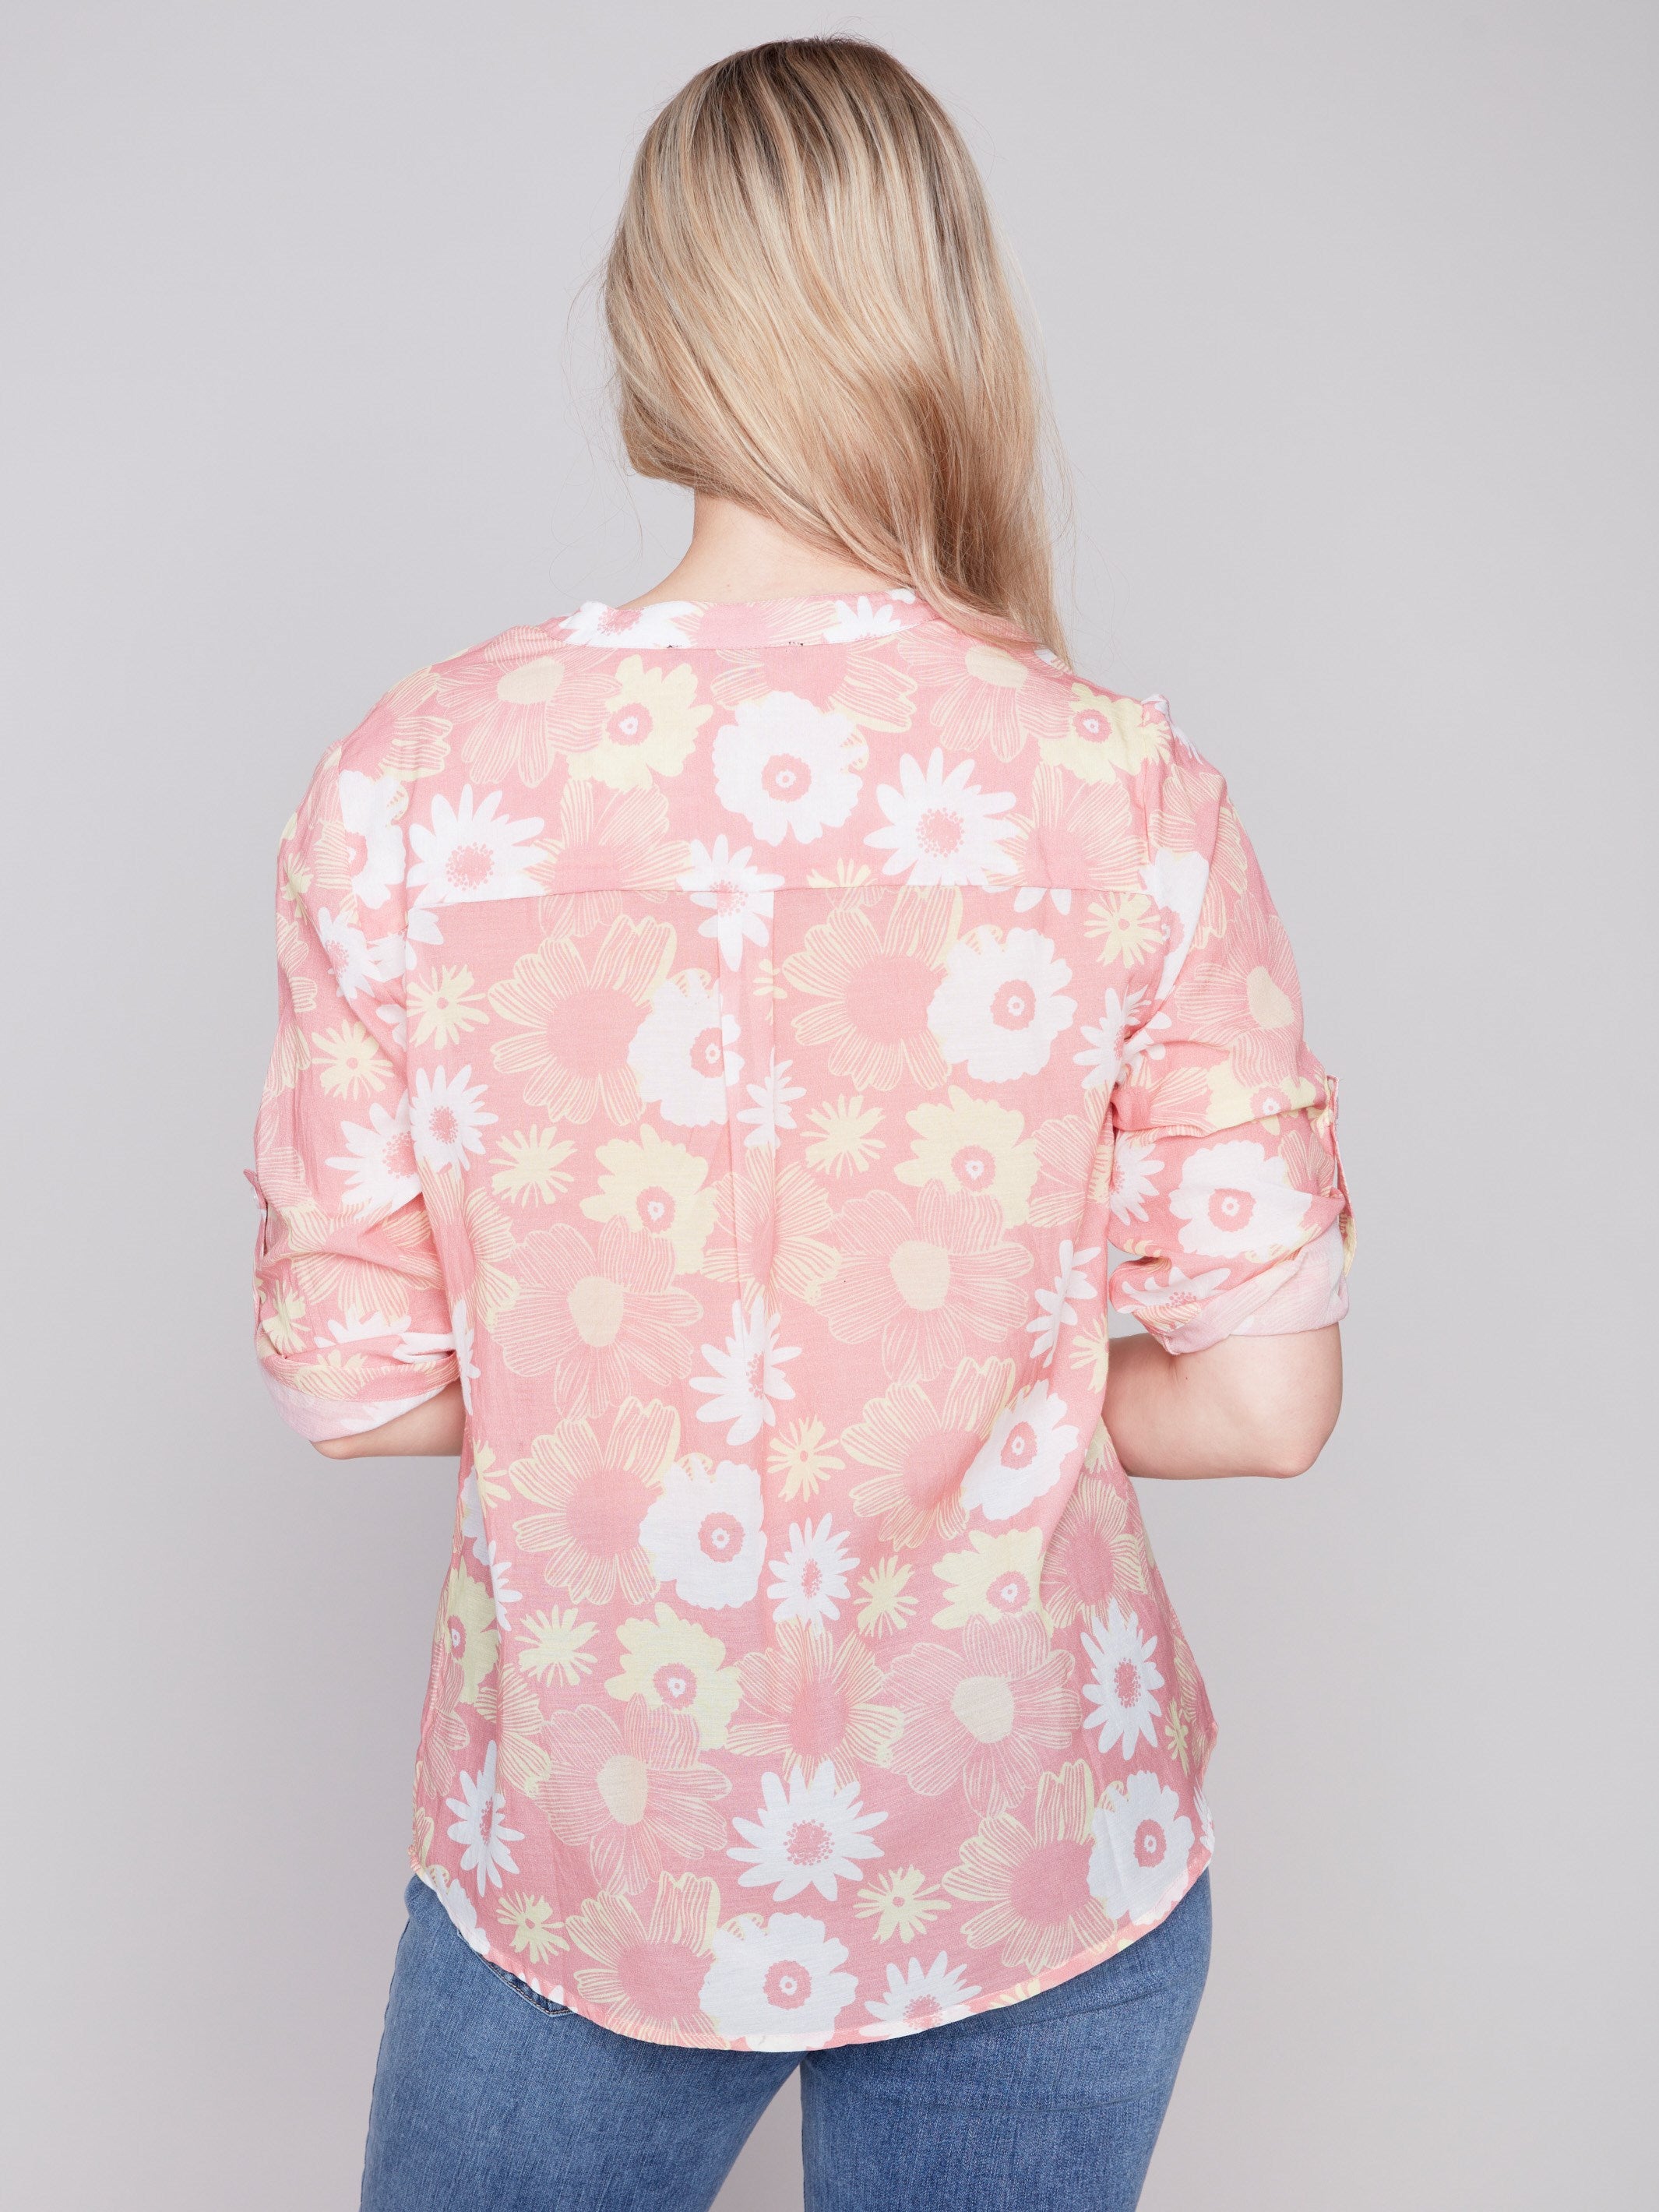 Printed Half-Button Blouse - Cosmos - Charlie B Collection Canada - Image 2